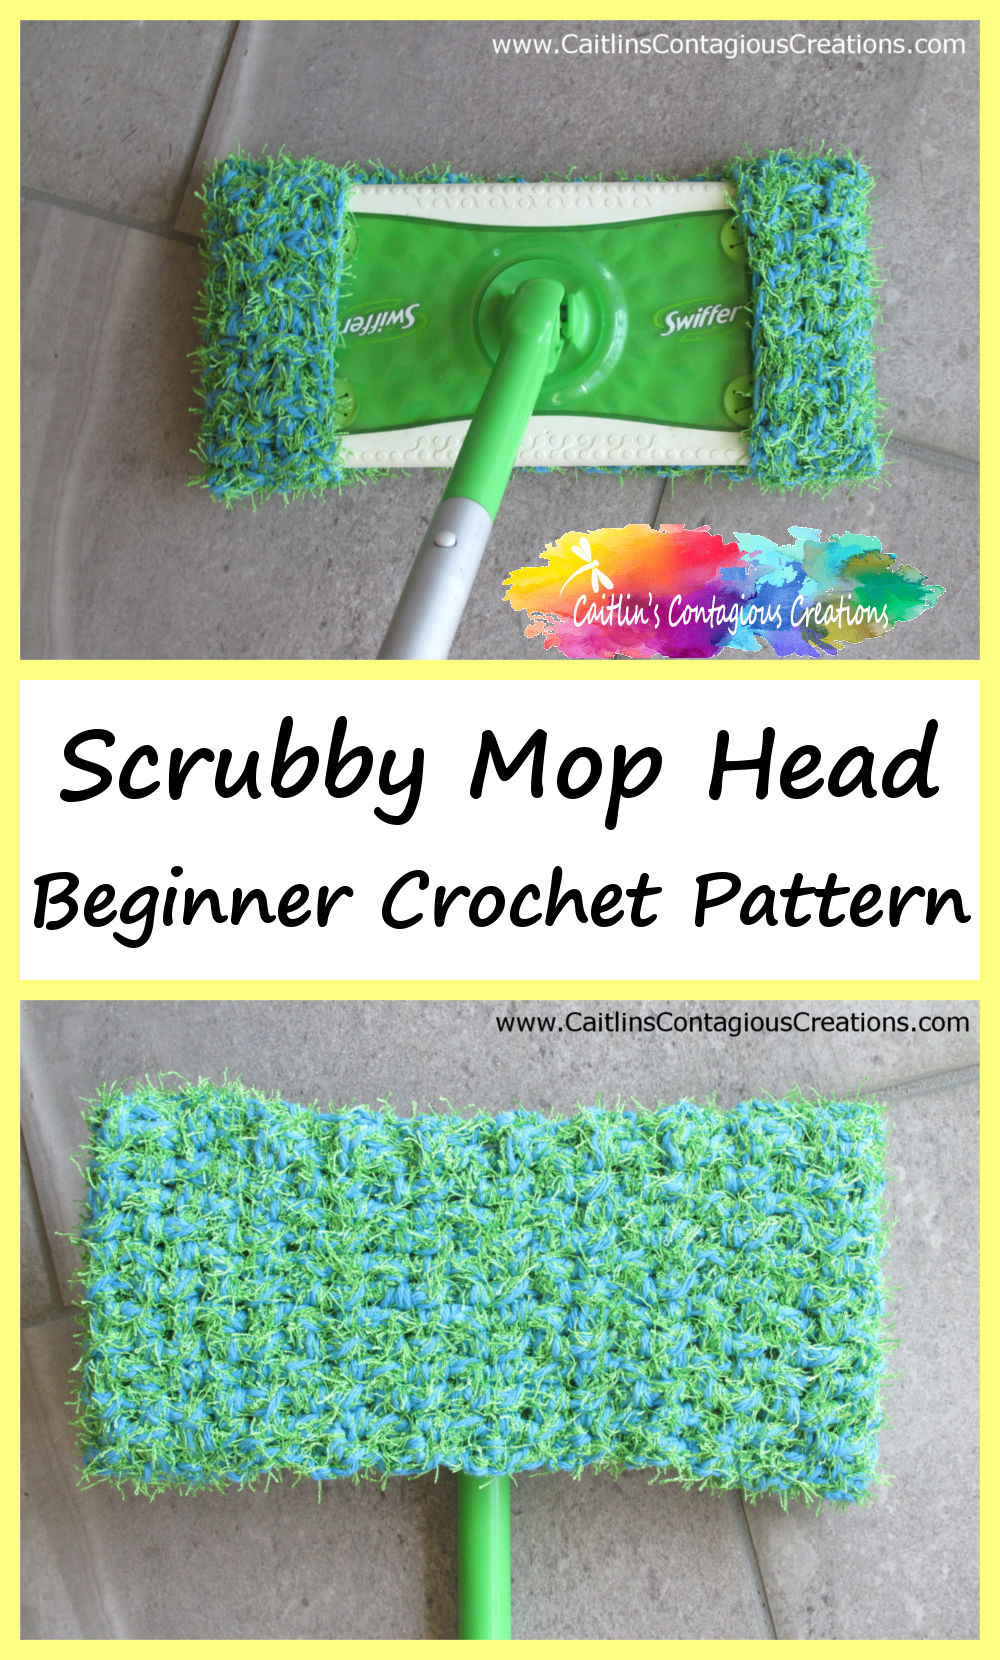 Scrubby Mop Head Crochet Pattern Free on Caitlin's Contagius Creations